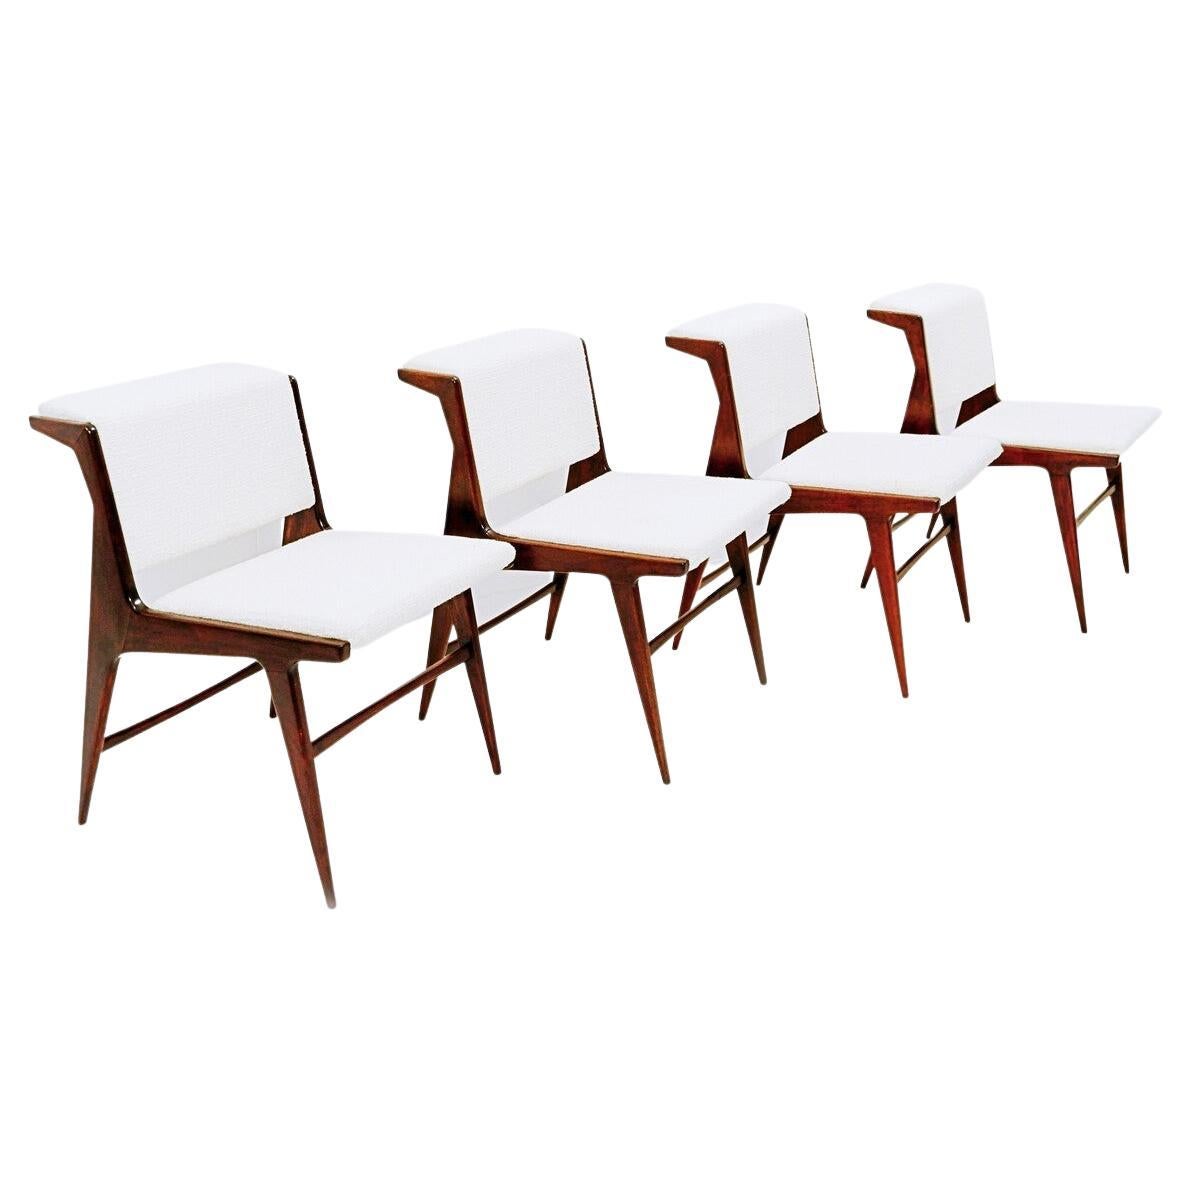 Set of 4 Mid-Century Modern Italian Chairs, Wood and White Fabric, 1960s For Sale